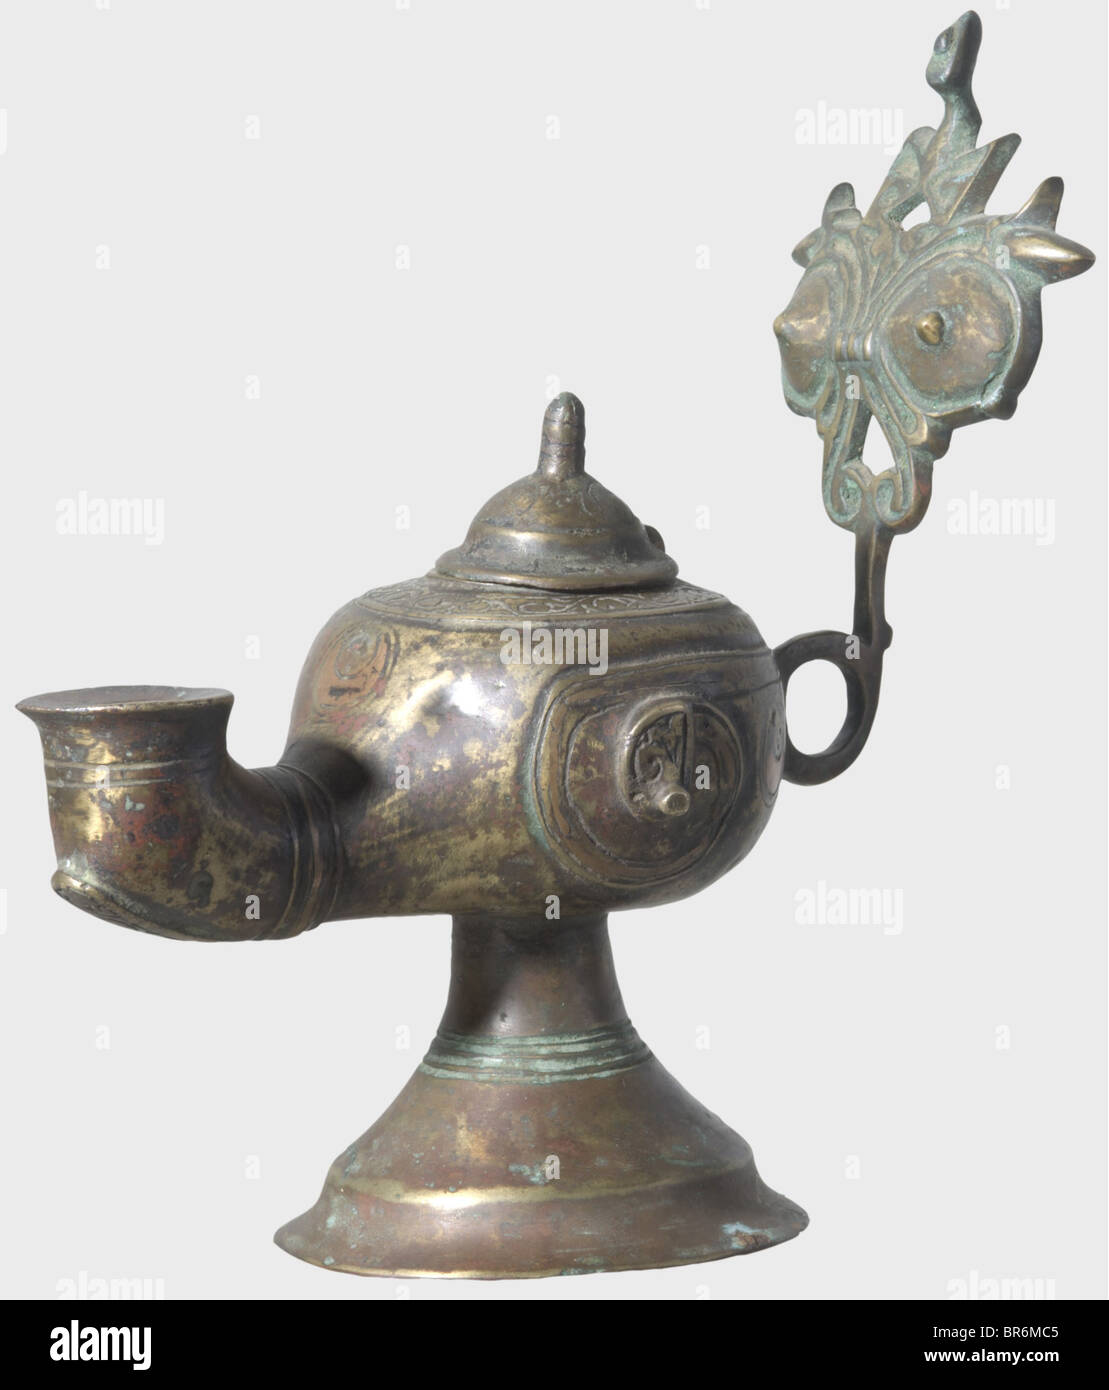 Vintage Oil Burning Engraved Brass Genie Lamp, Made in India